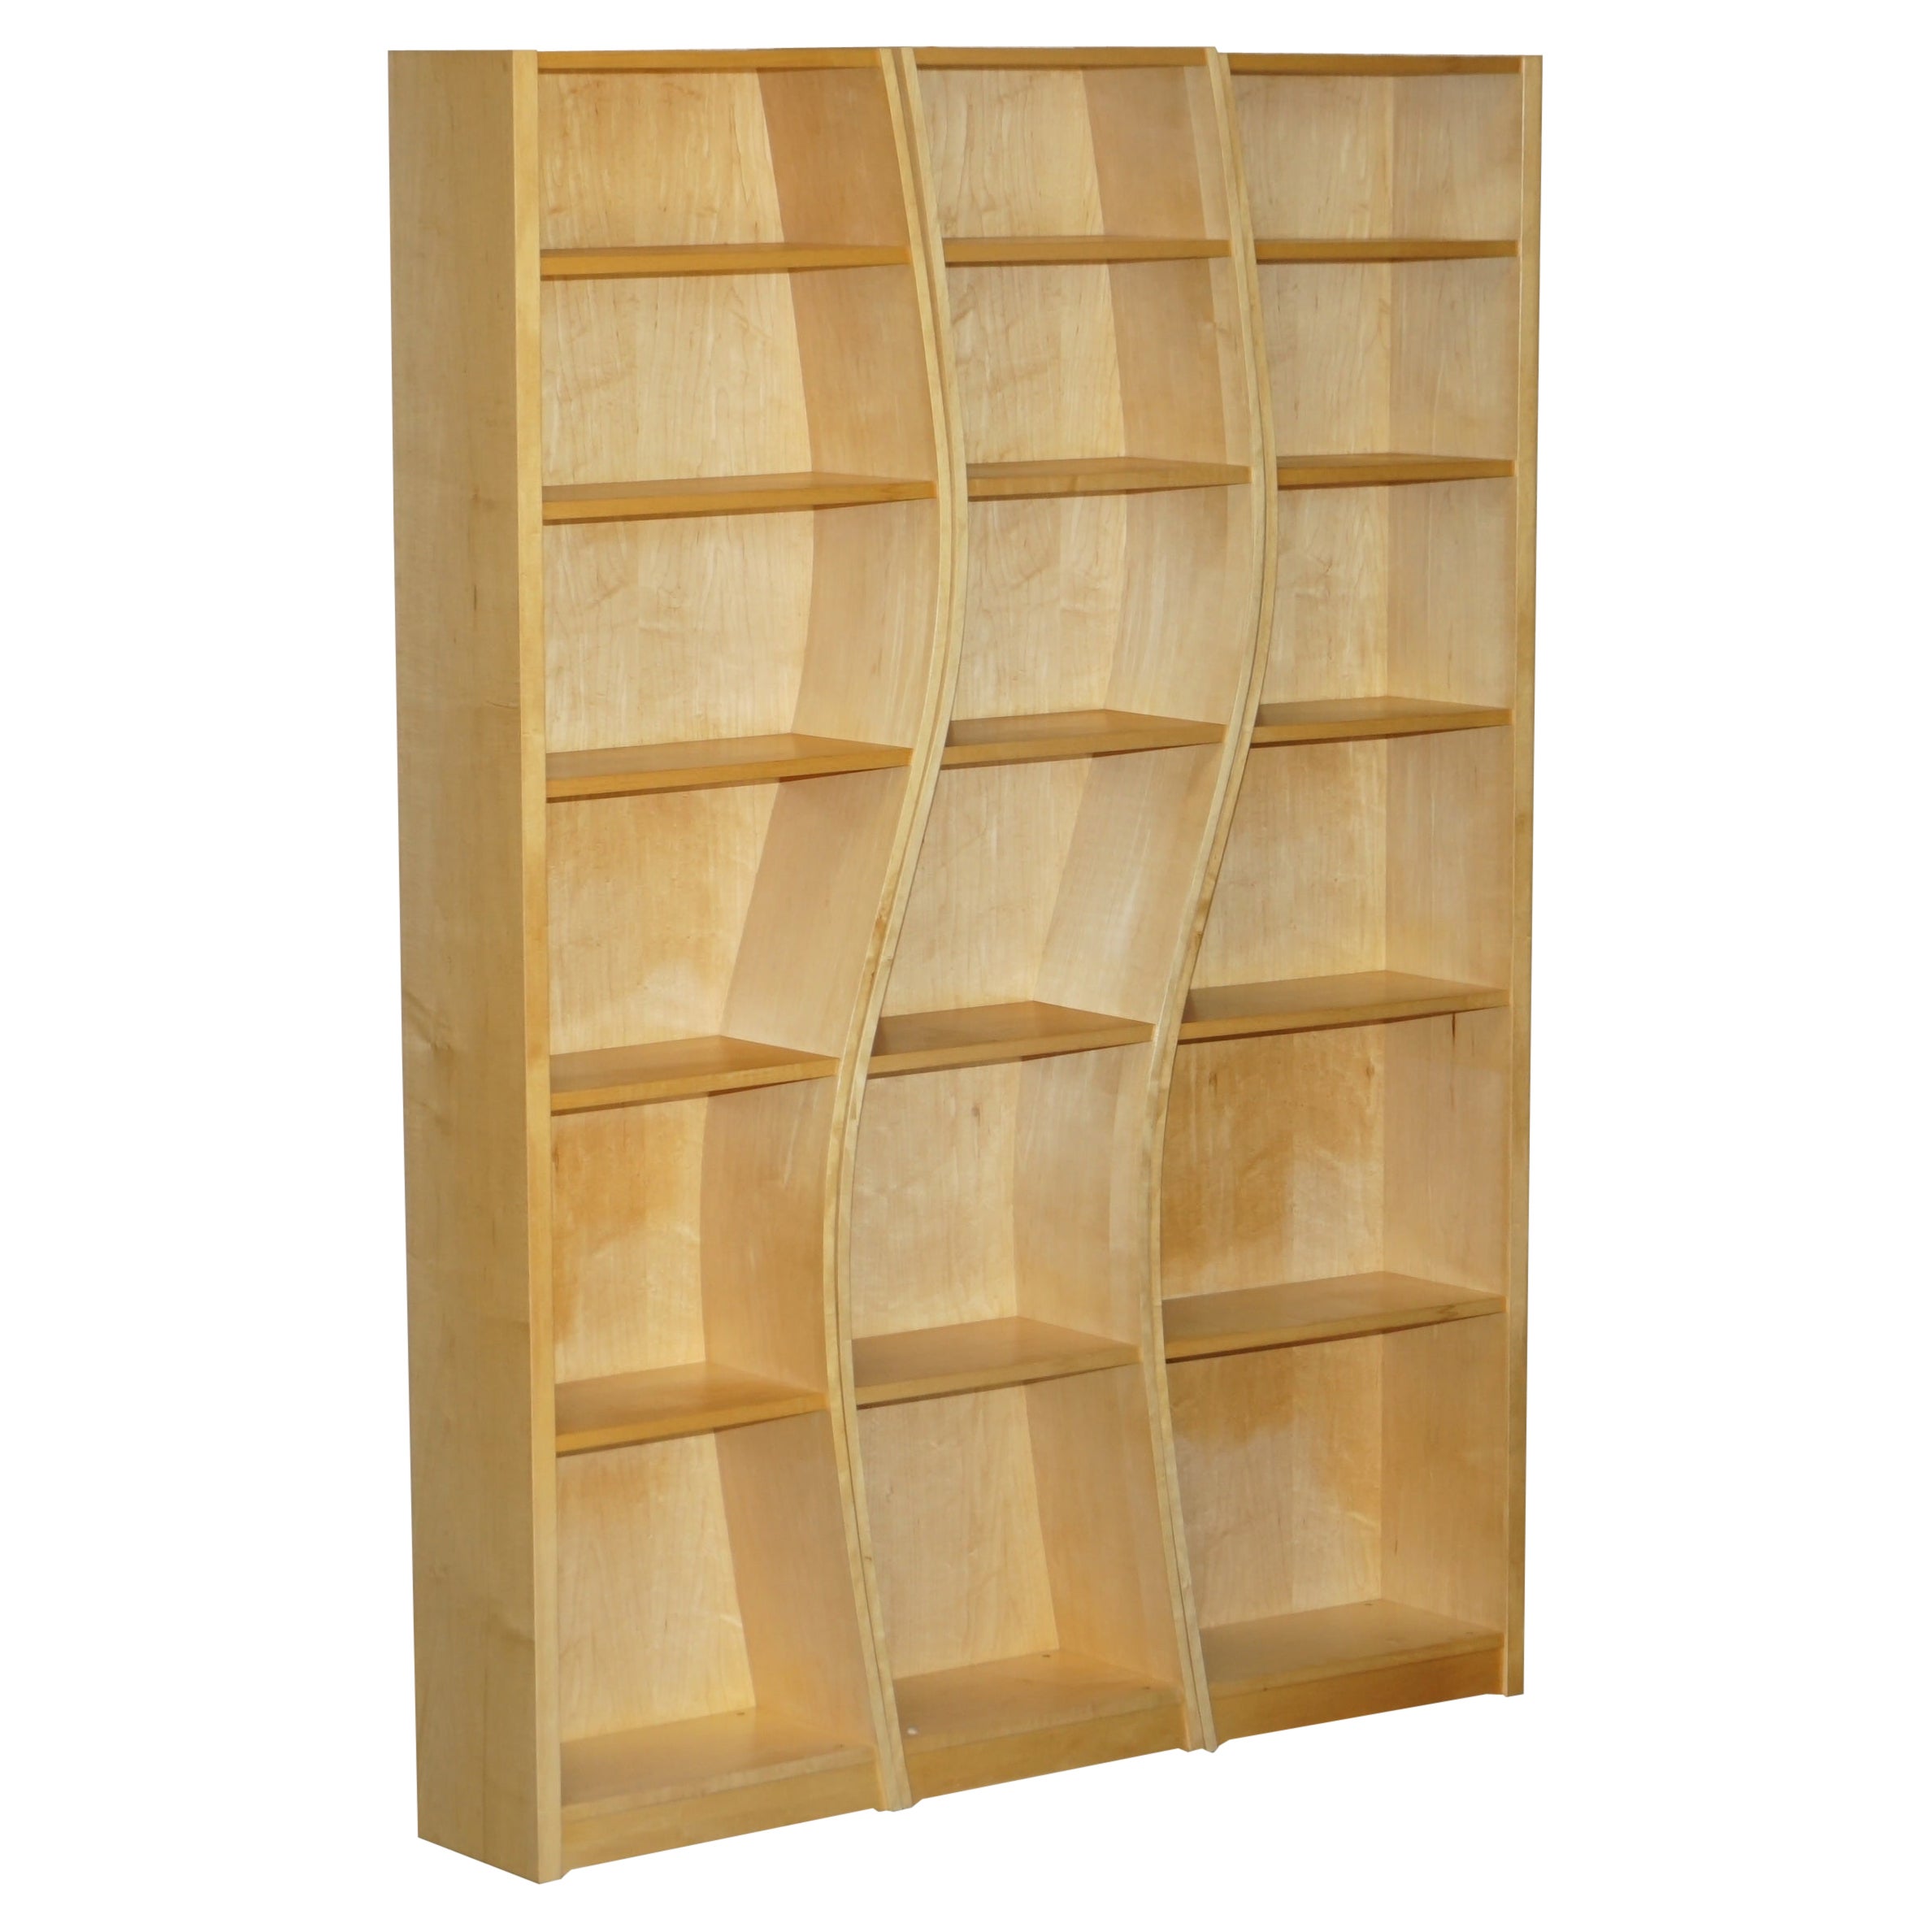 Three Section Very Cool Bendy Library Bookcases Must See Pictures in Birch